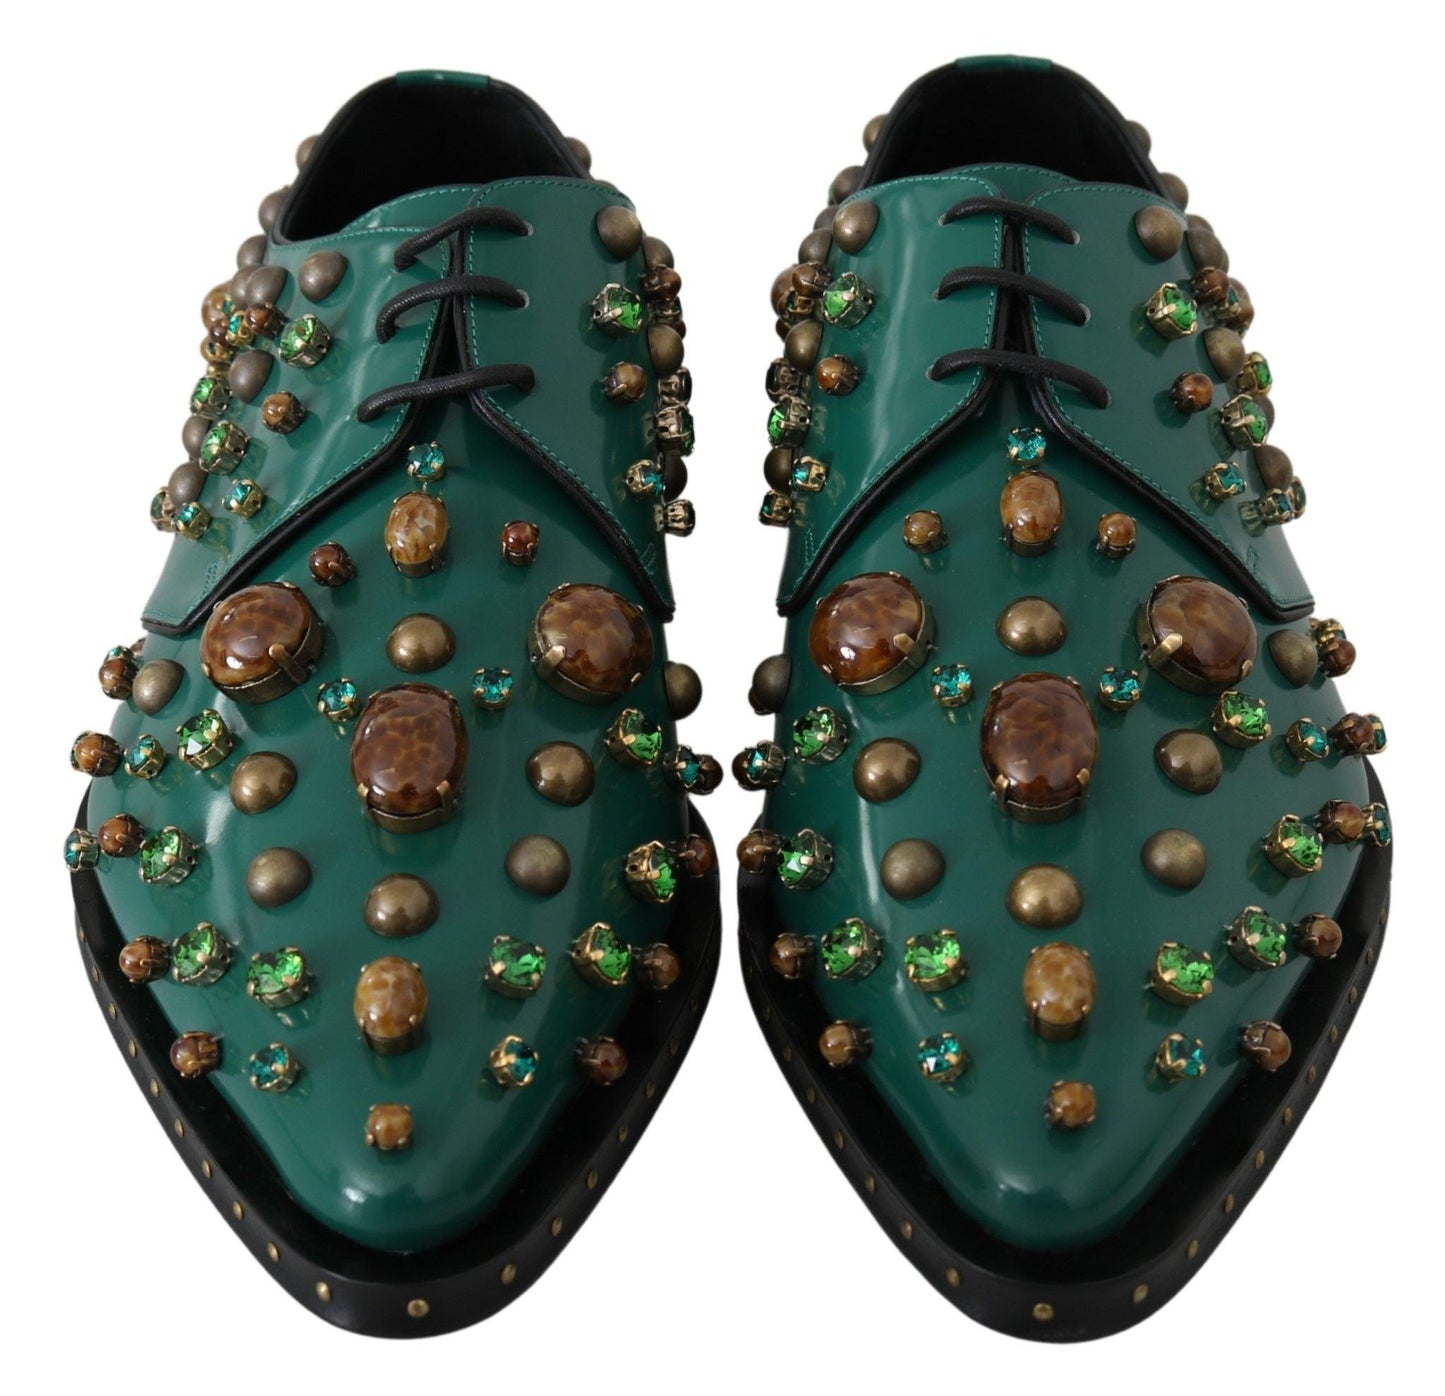 Dolce & Gabbana Emerald Leather Dress Shoes with Crystal Accents - PER.FASHION